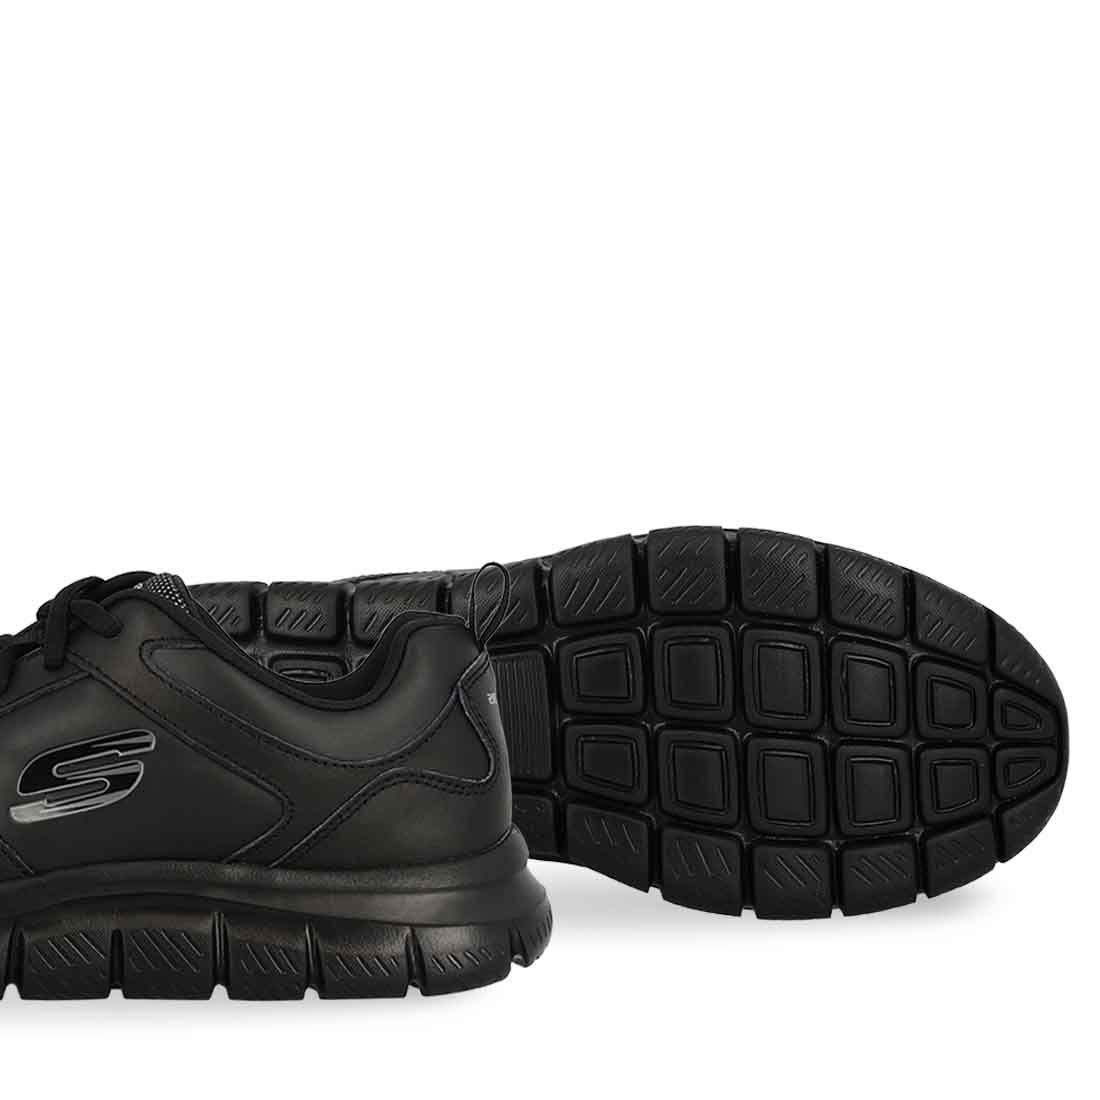 Skechers Track High Overtime Ανδρικά Αθλητικά Παπούτσια Trail Running Μαύρα 999894/ΒΒΚ